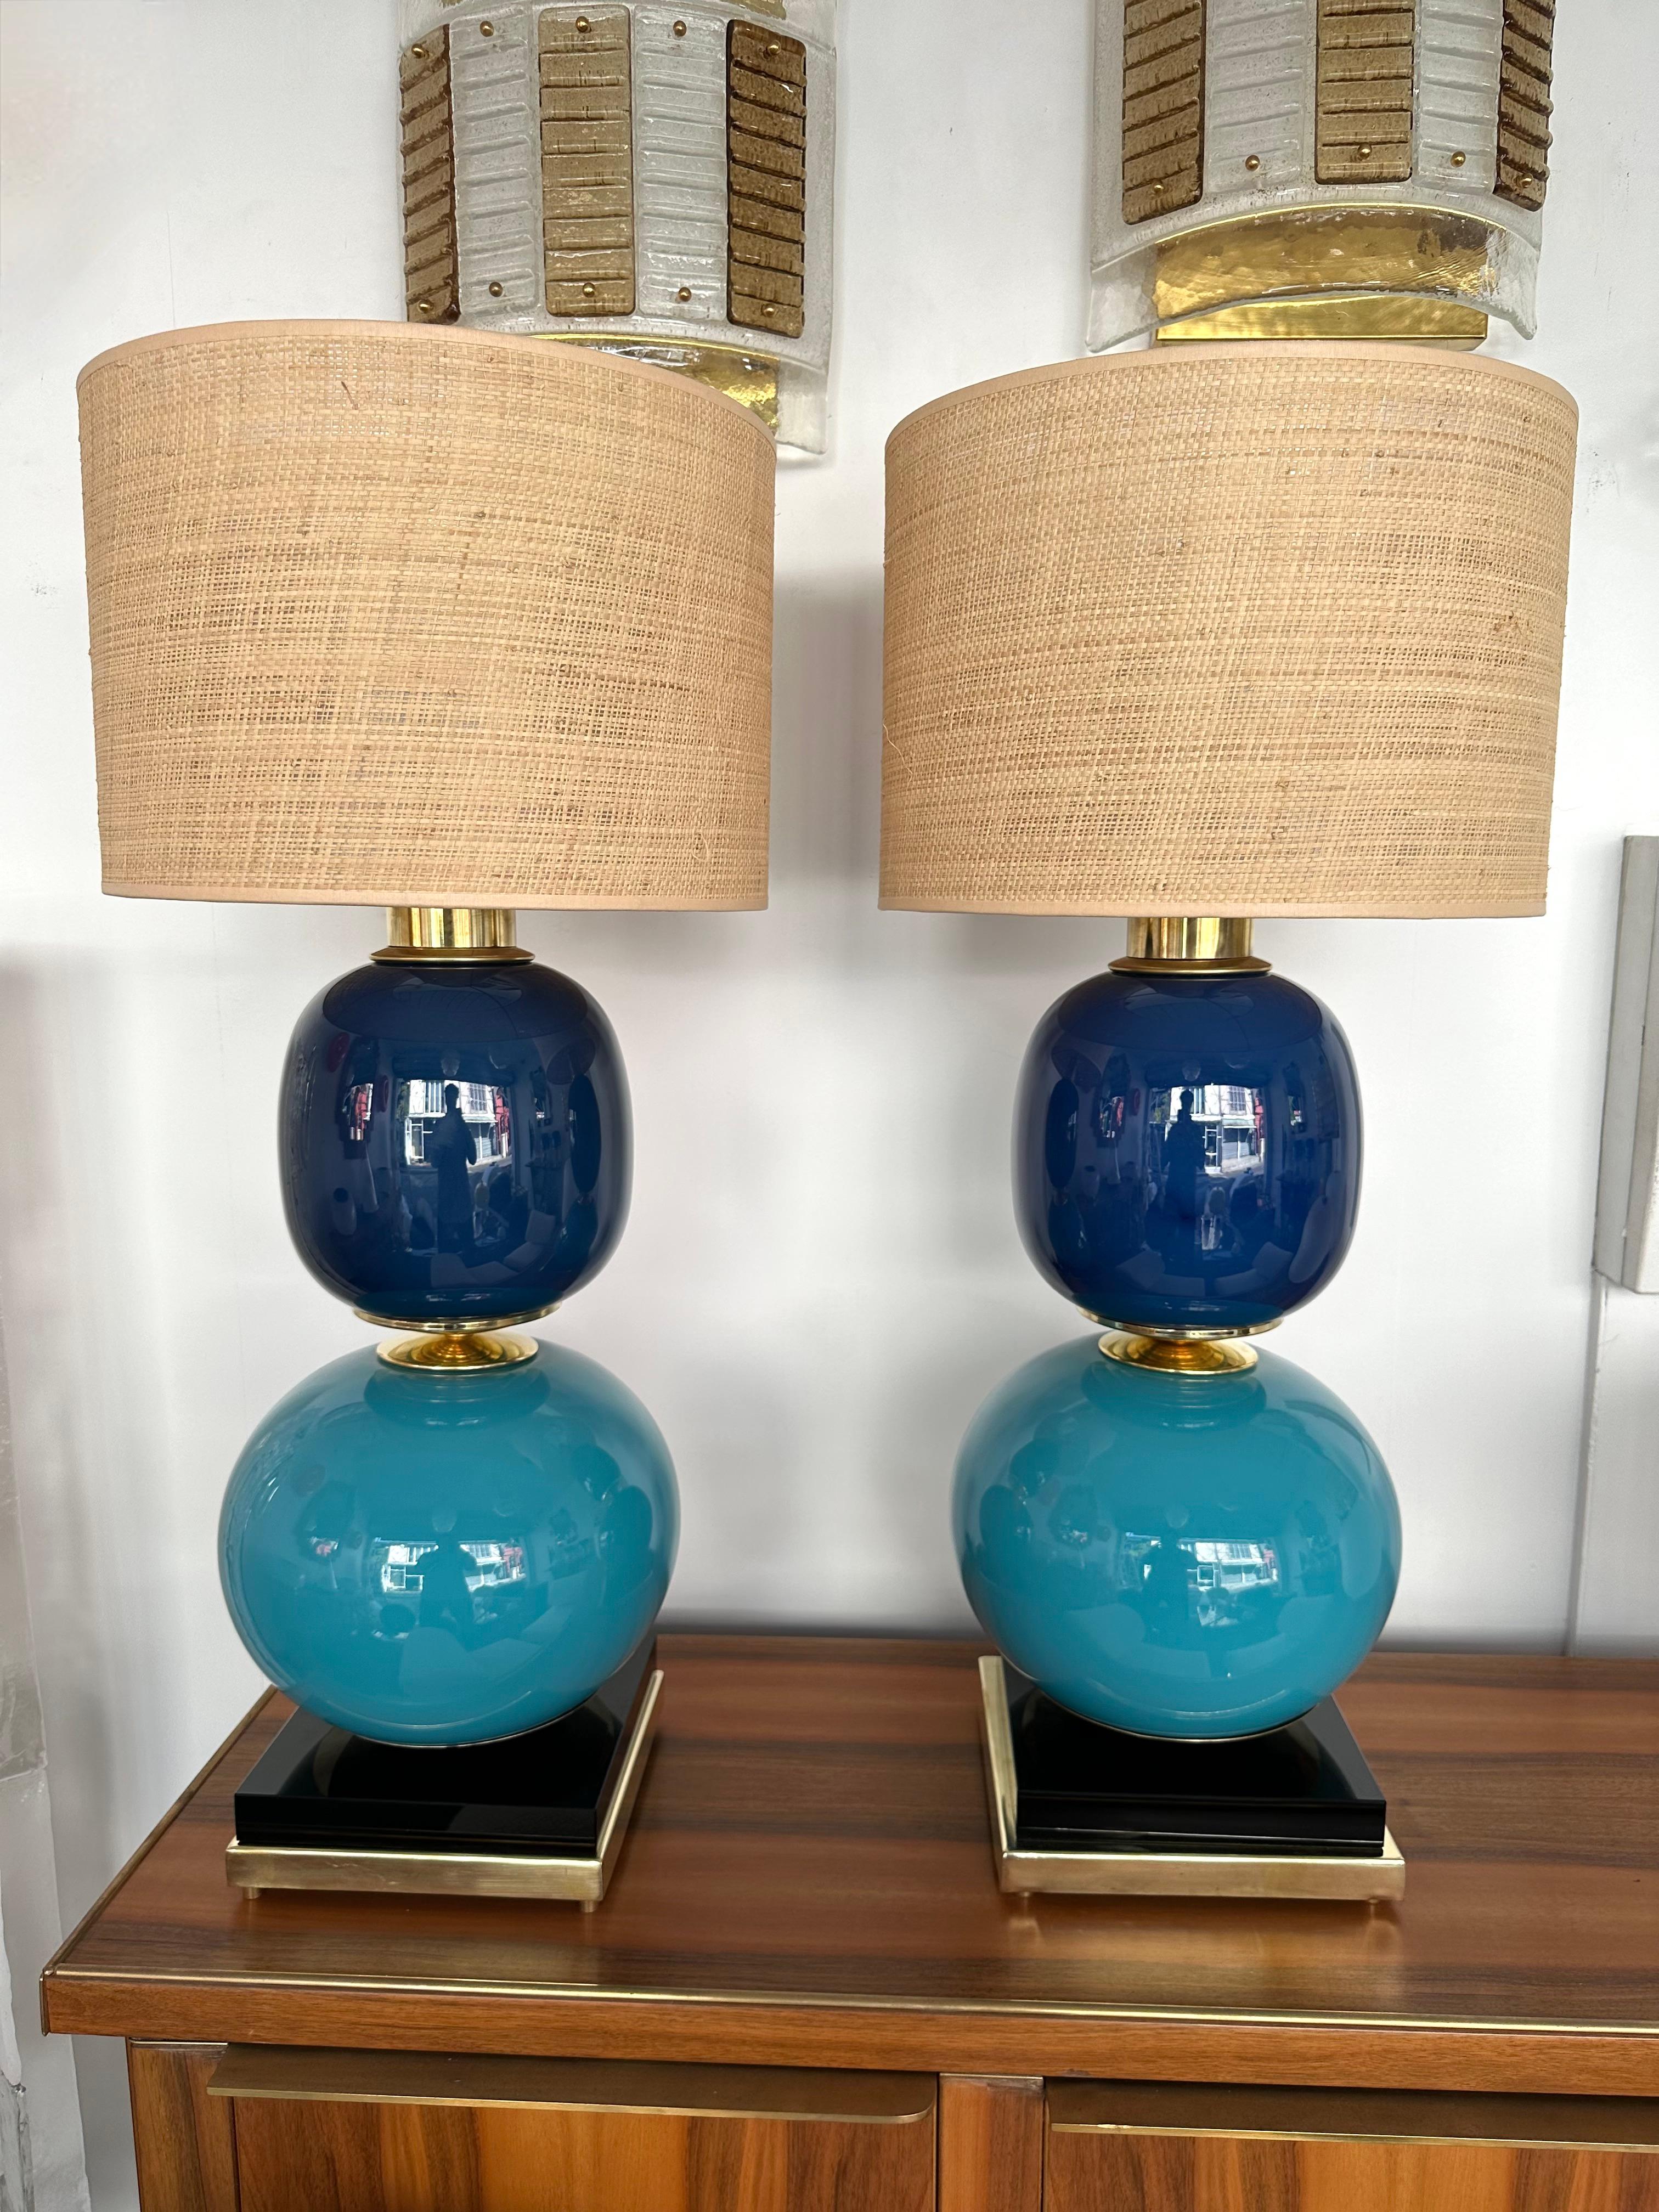 Pair of table or bedside brass lamps, blue and turquoise Murano glass. Contemporary work from a small italian artisanal workshop in a Mid-Century Modern Space Age Hollywood Regency, Memphis 1980s mood.

Demo Shades are not included.
Measurements in